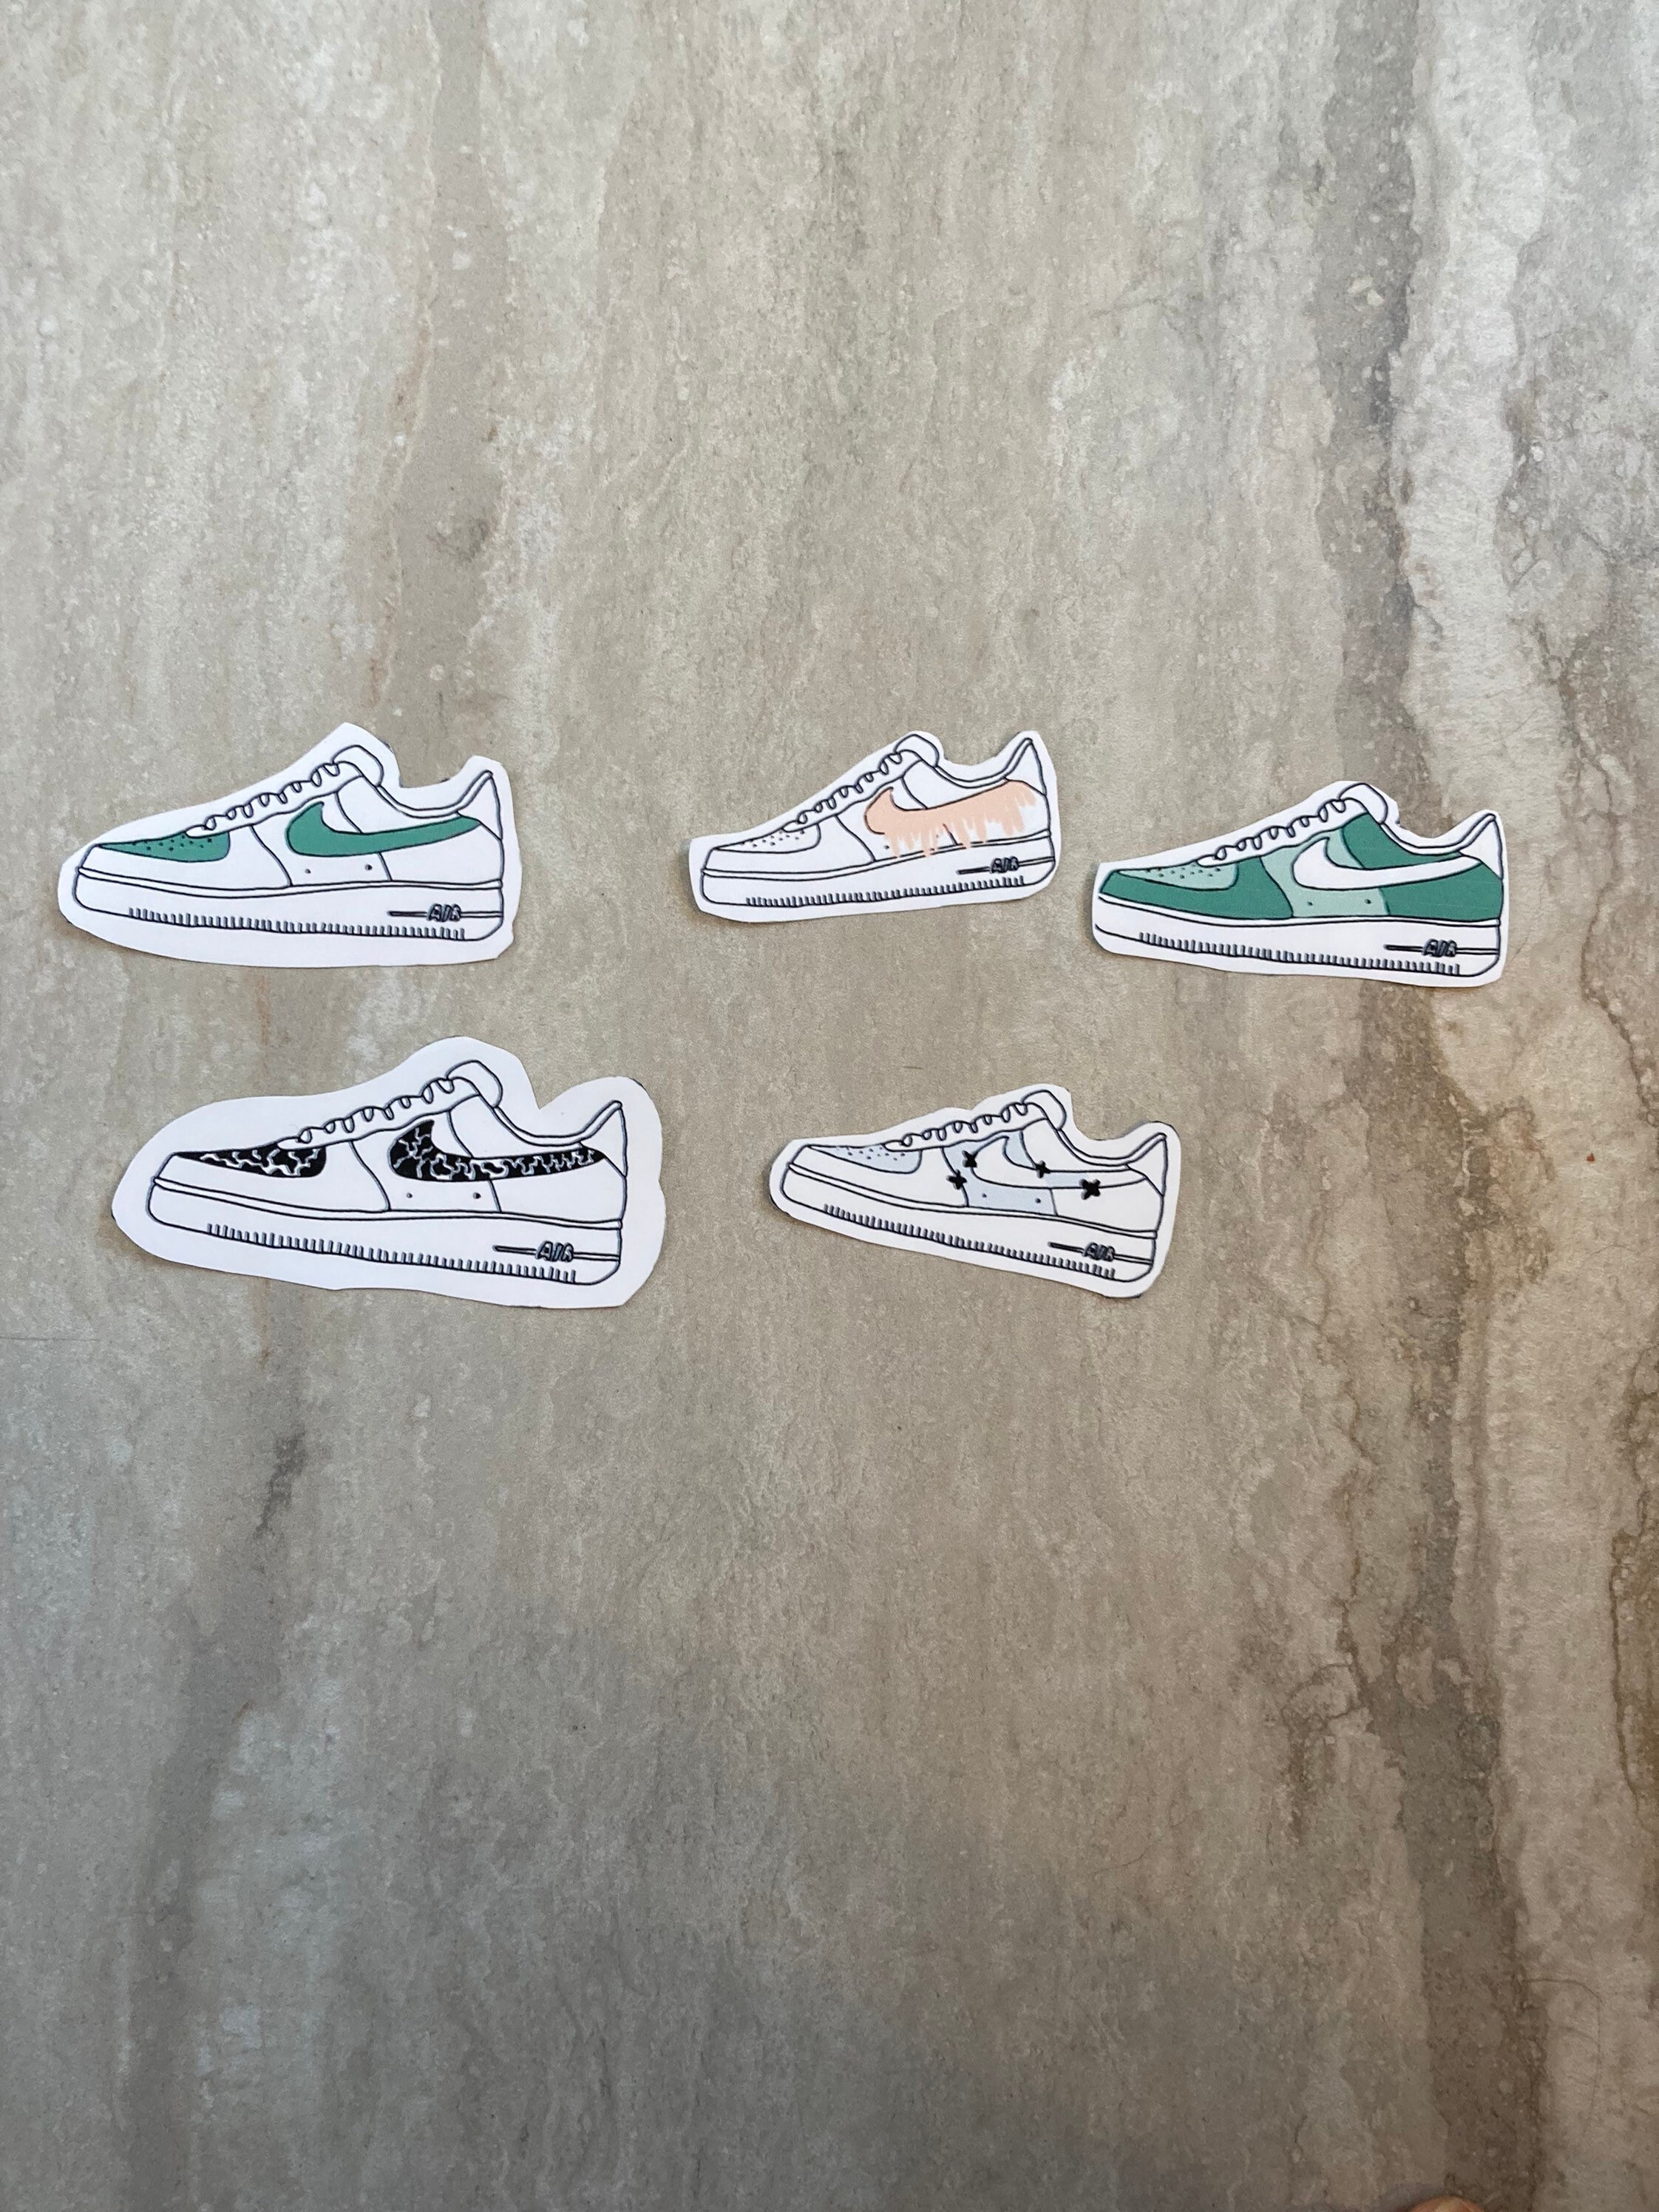 Nike Air Force 1 sticker pack Aesthetic sticker pack shoe | Etsy